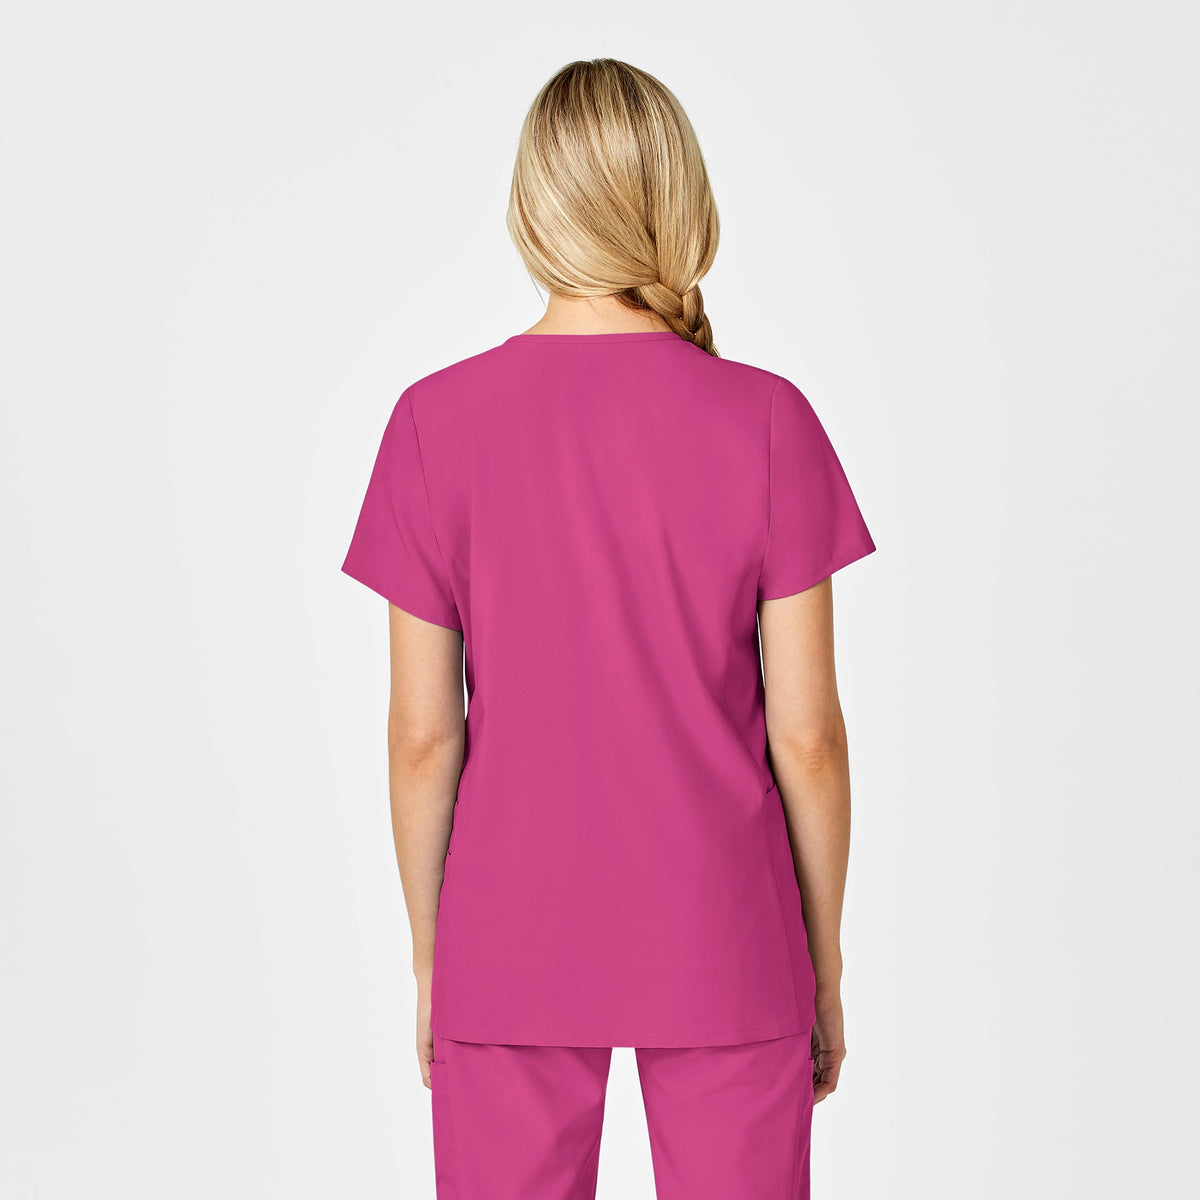 W123 Maternity V-Neck Scrub Top Hot Pink back view